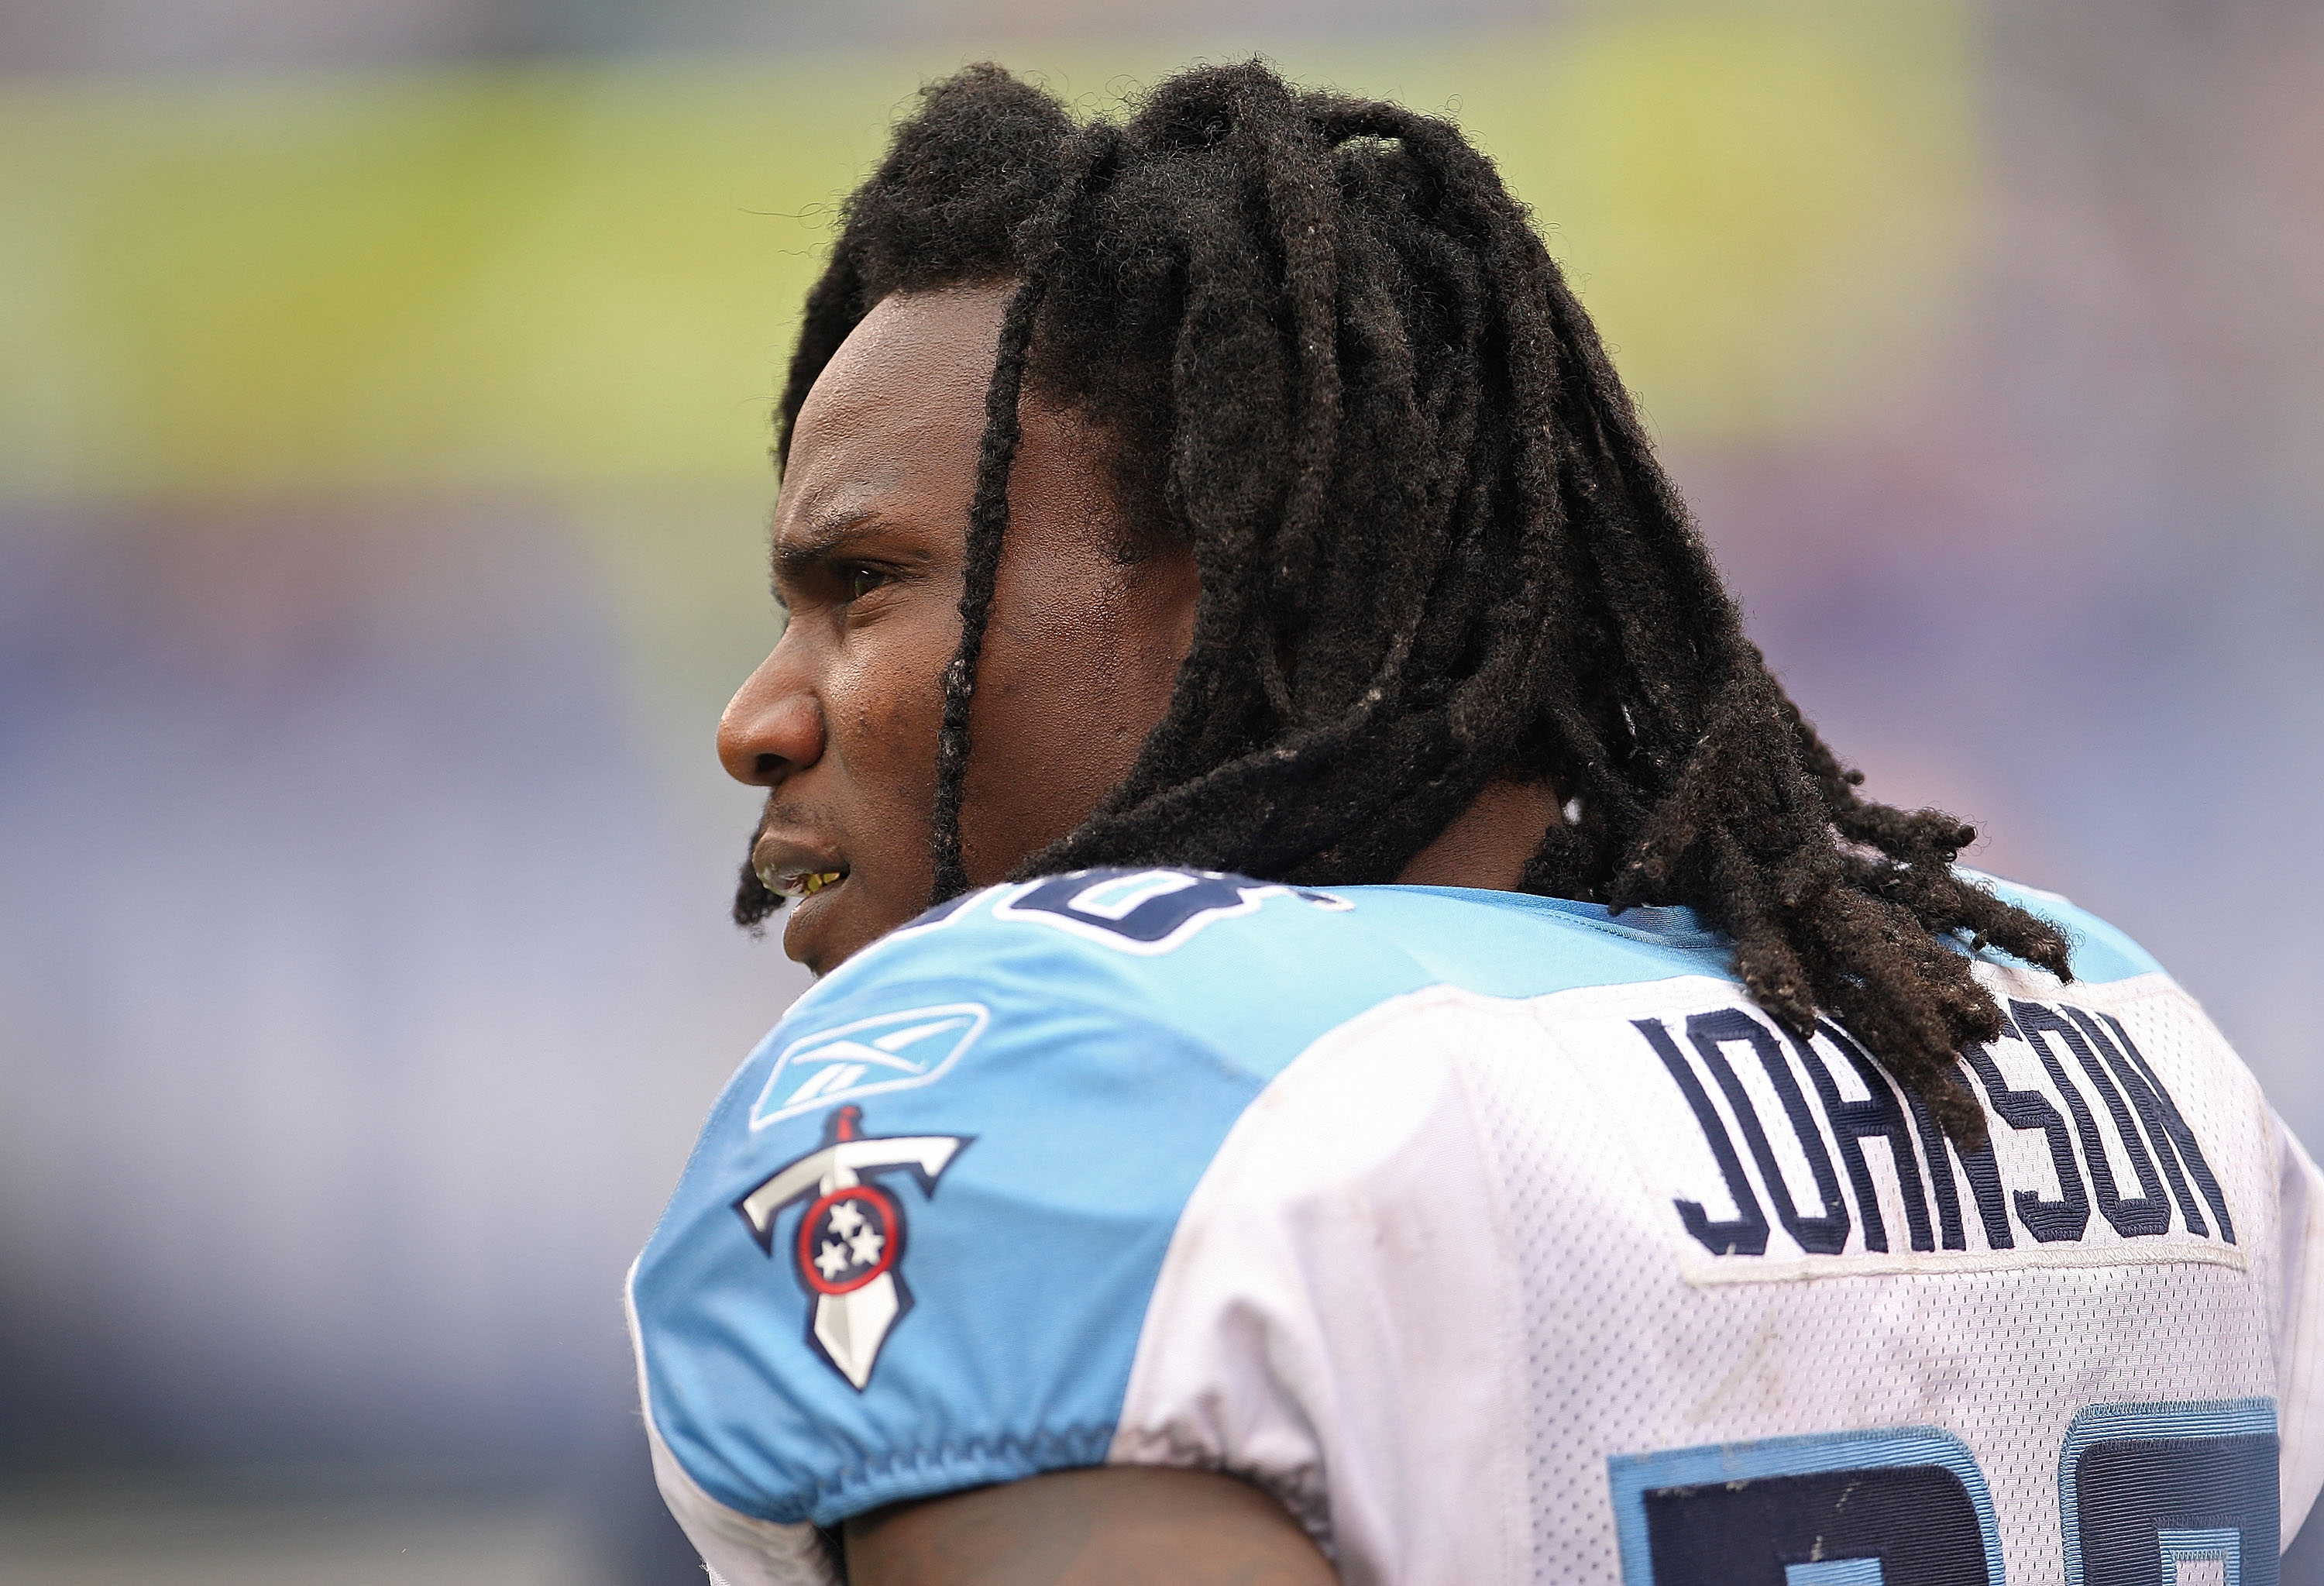 EAST RUTHERFORD, NJ - SEPTEMBER 26:  Chris Johnson #28 of the Tennessee Titans waits on the sidelines during a game against the New York Giants at New Meadowlands Stadium on September 26, 2010 in East Rutherford, New Jersey.  (Photo by Mike Ehrmann/Getty